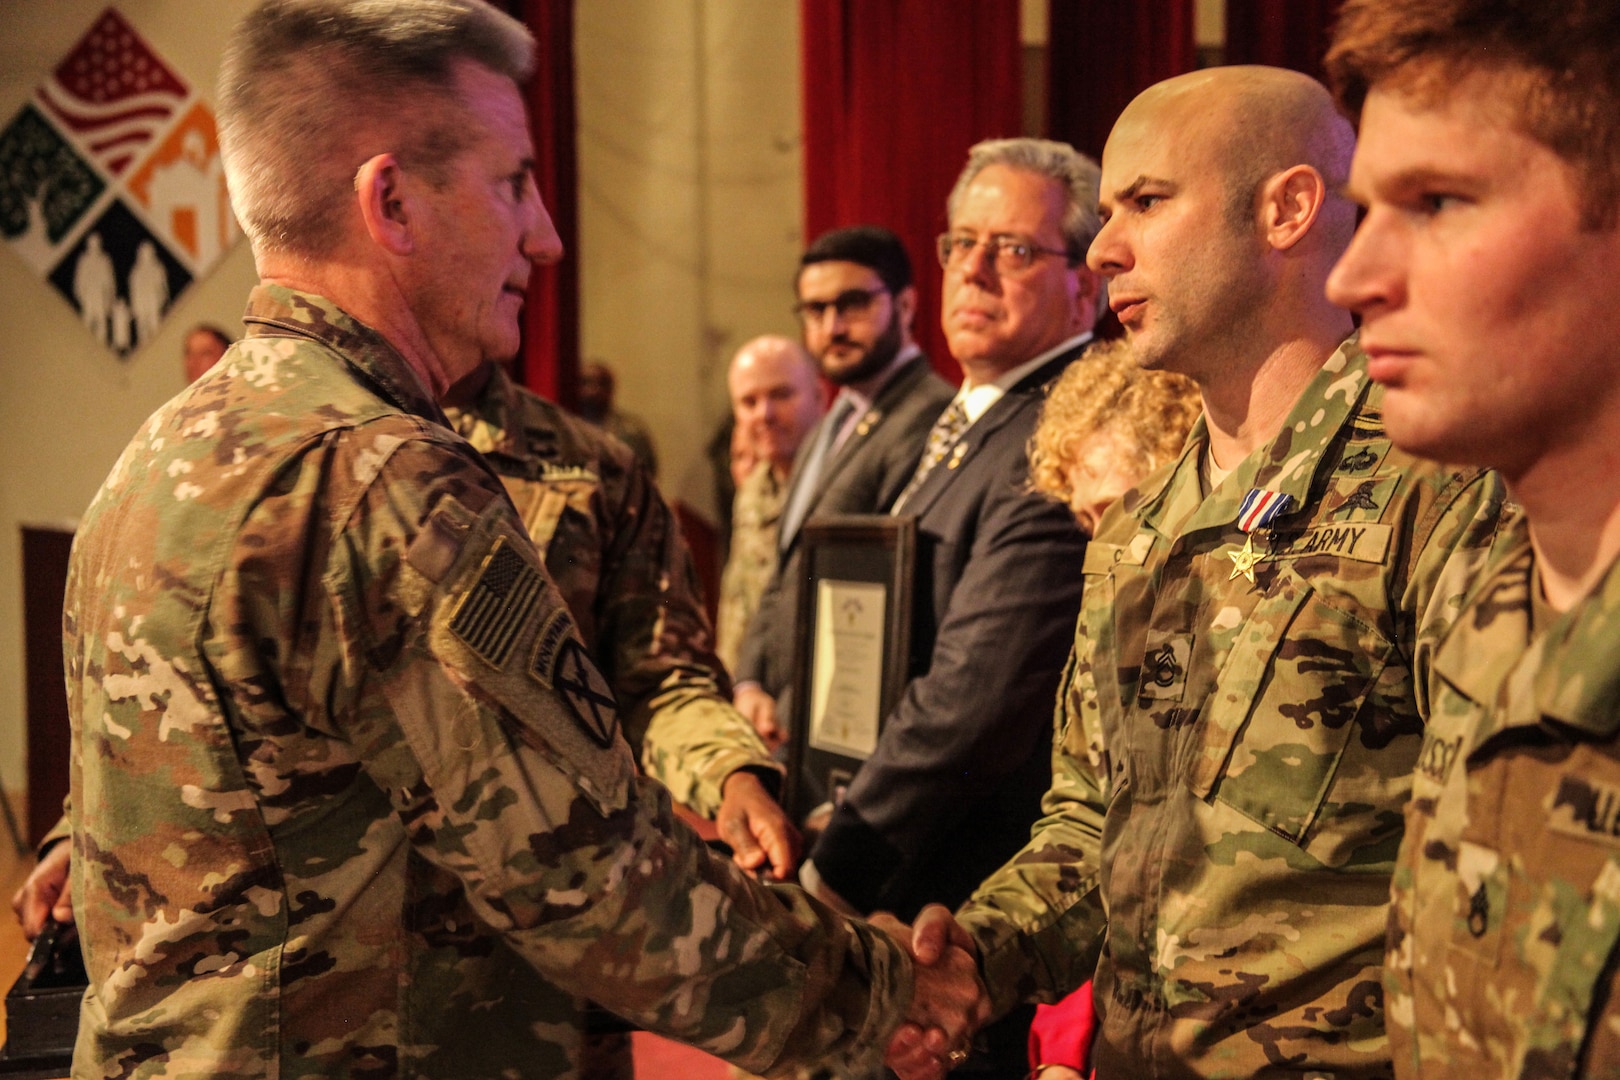 Gen. John Nicholson, commander of the Resolute Support mission and U.S. Forces-Afghanistan (Left), congratulates Sgt. 1st Class Brian Seidl, 10th Special Forces Group (Airborne), after presenting him with the Silver Star award on Fort Carson, Colo., Feb 1, 2017. Seidl earned the Silver Star for his heroic actions during the Battle of Boz Qandahari, Afghanistan on Nov. 2-3, 2016. (U.S. Army photo by Sgt. Connor Mendez/Reviewed)